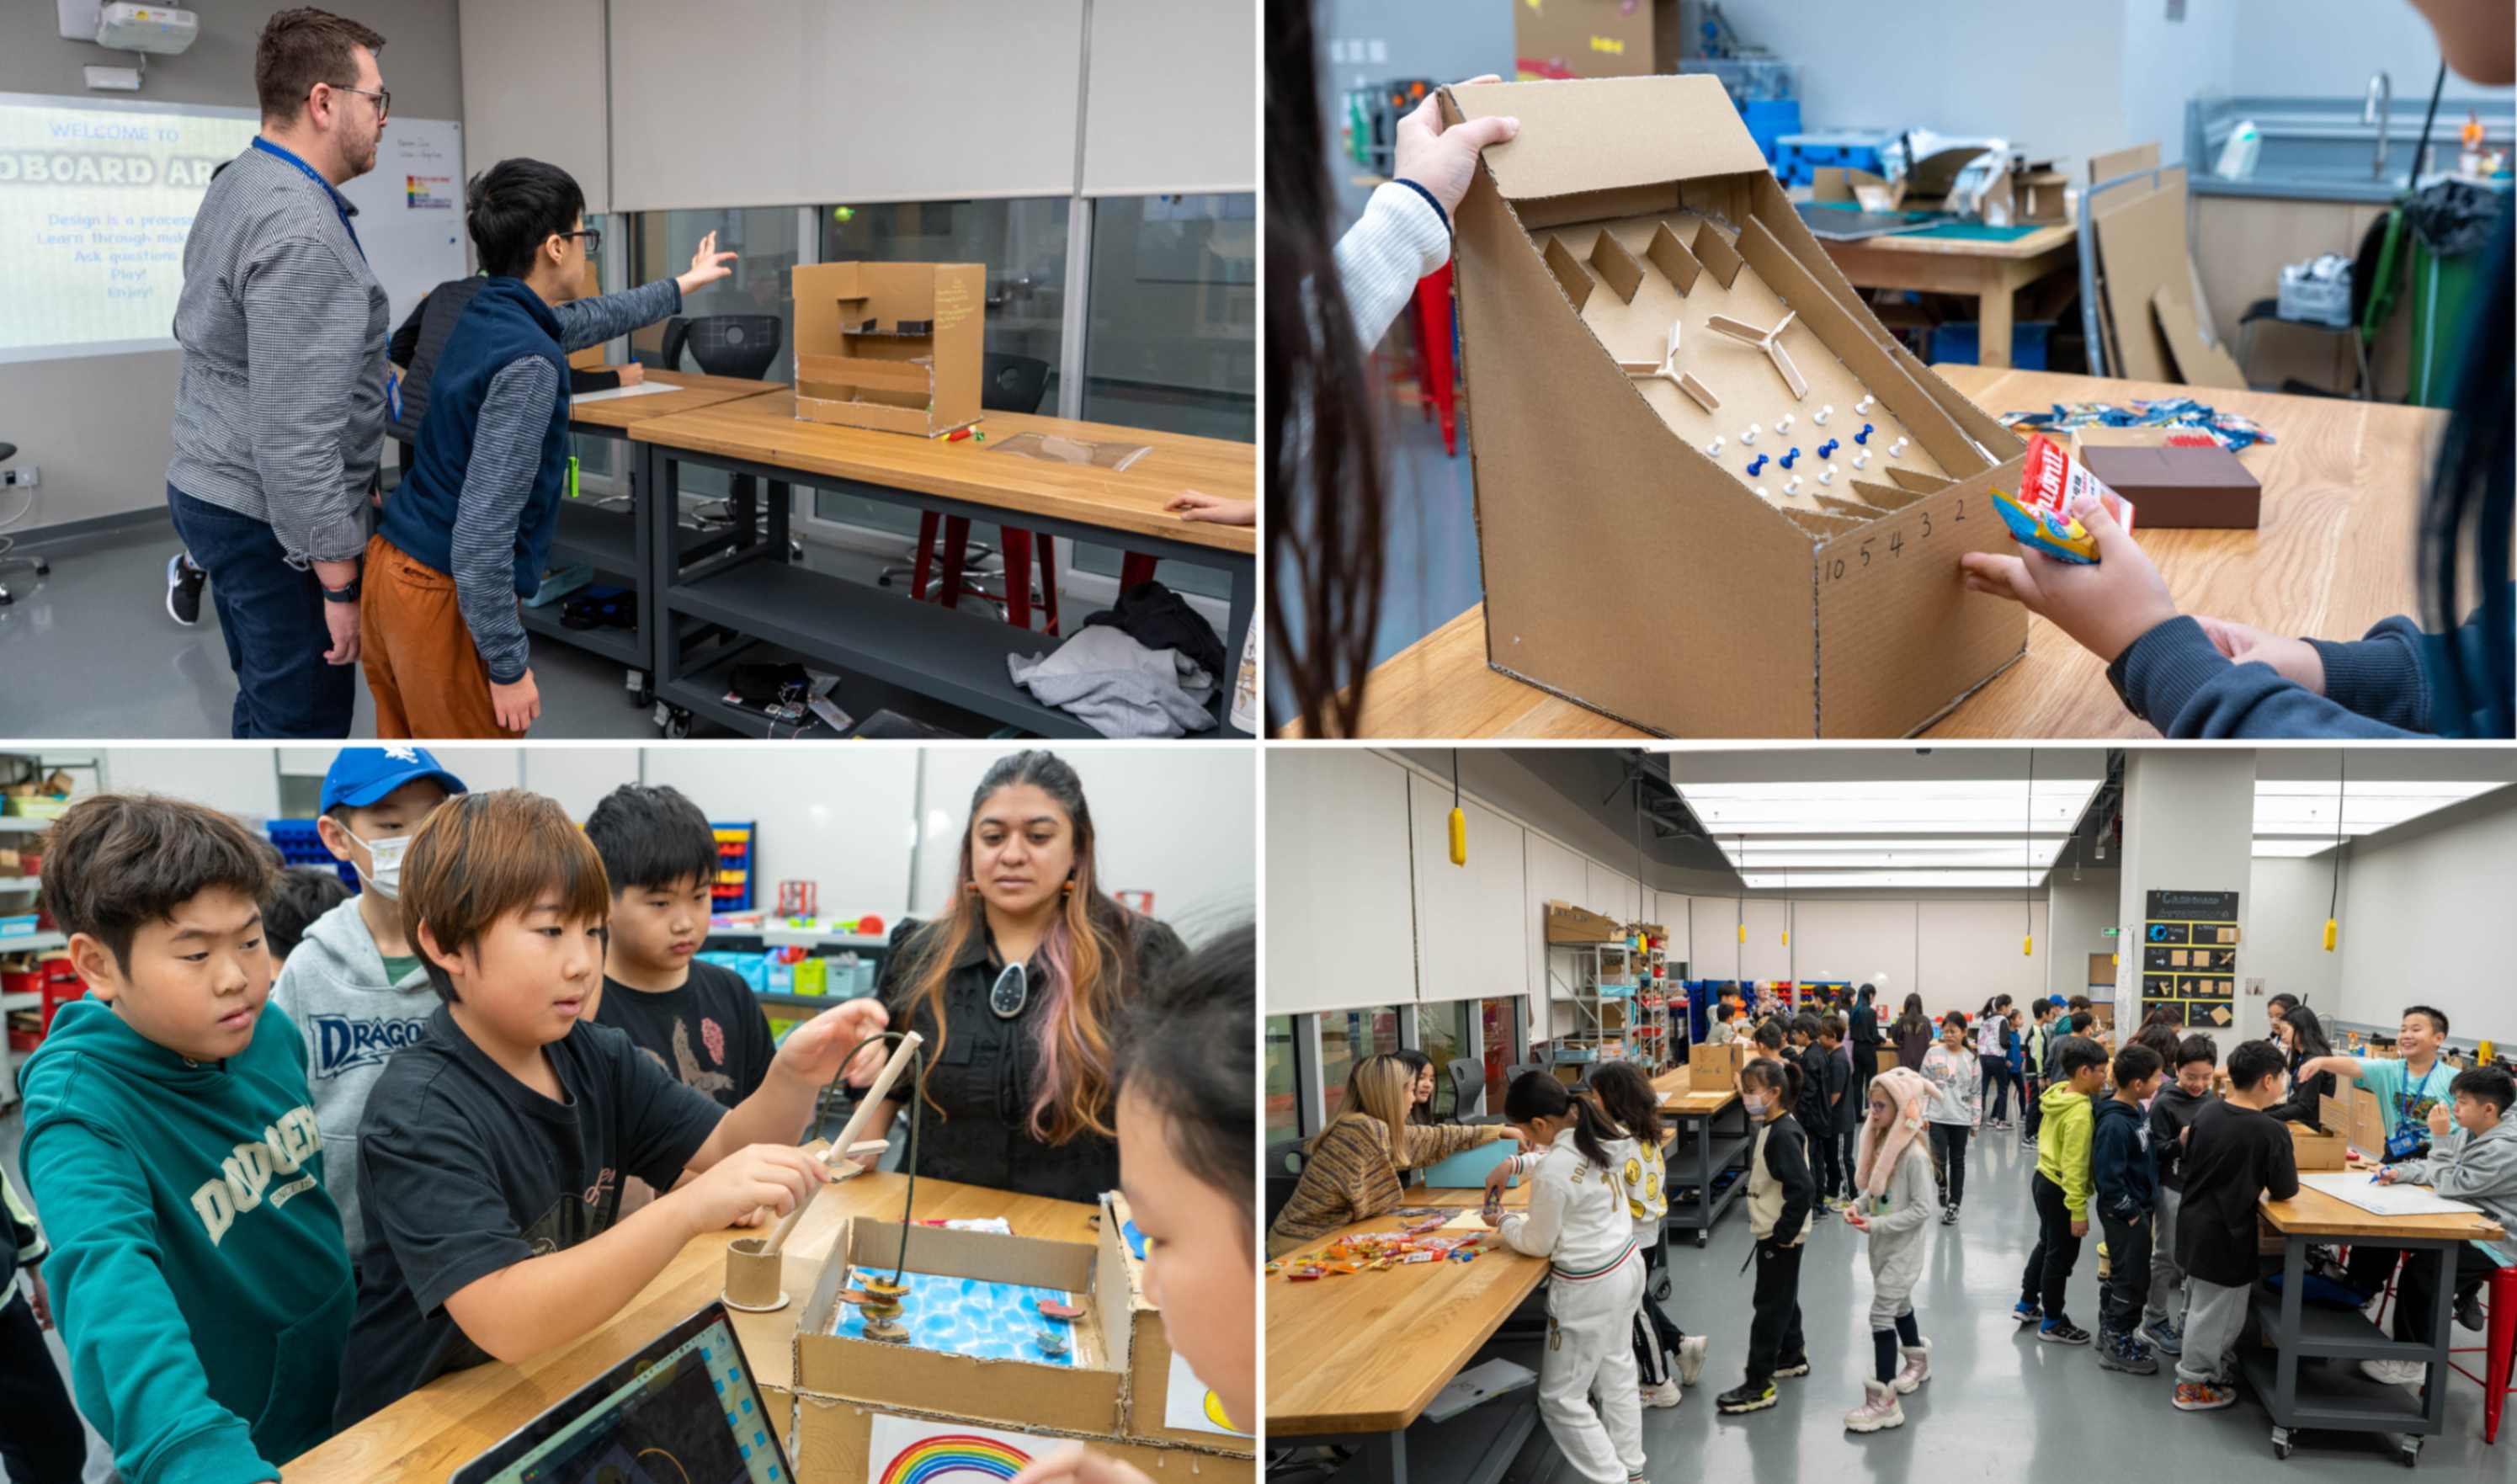 A collage of photos of students engaging in a design activity